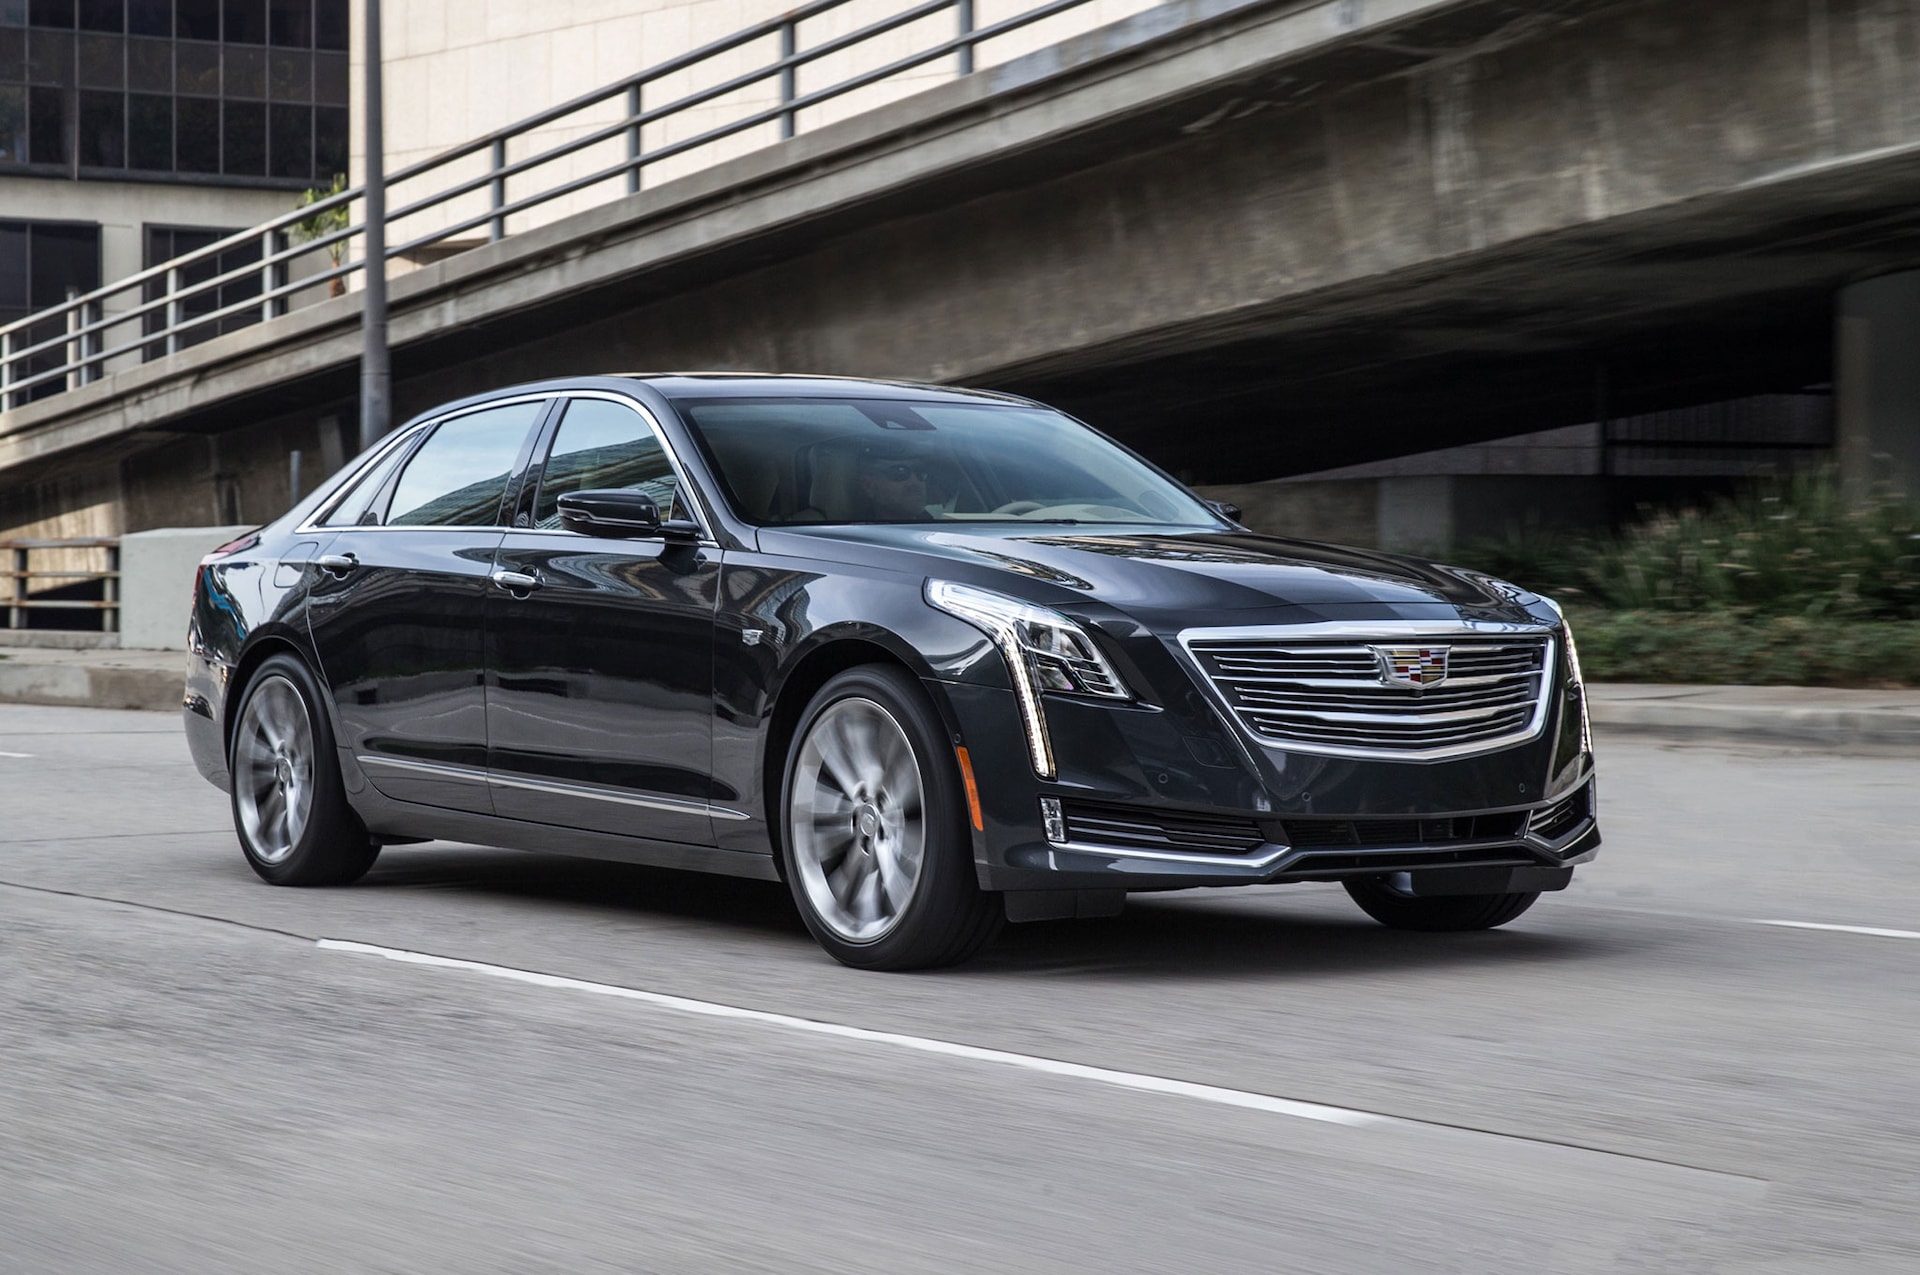 2016 Cadillac CT6 First Drive Review